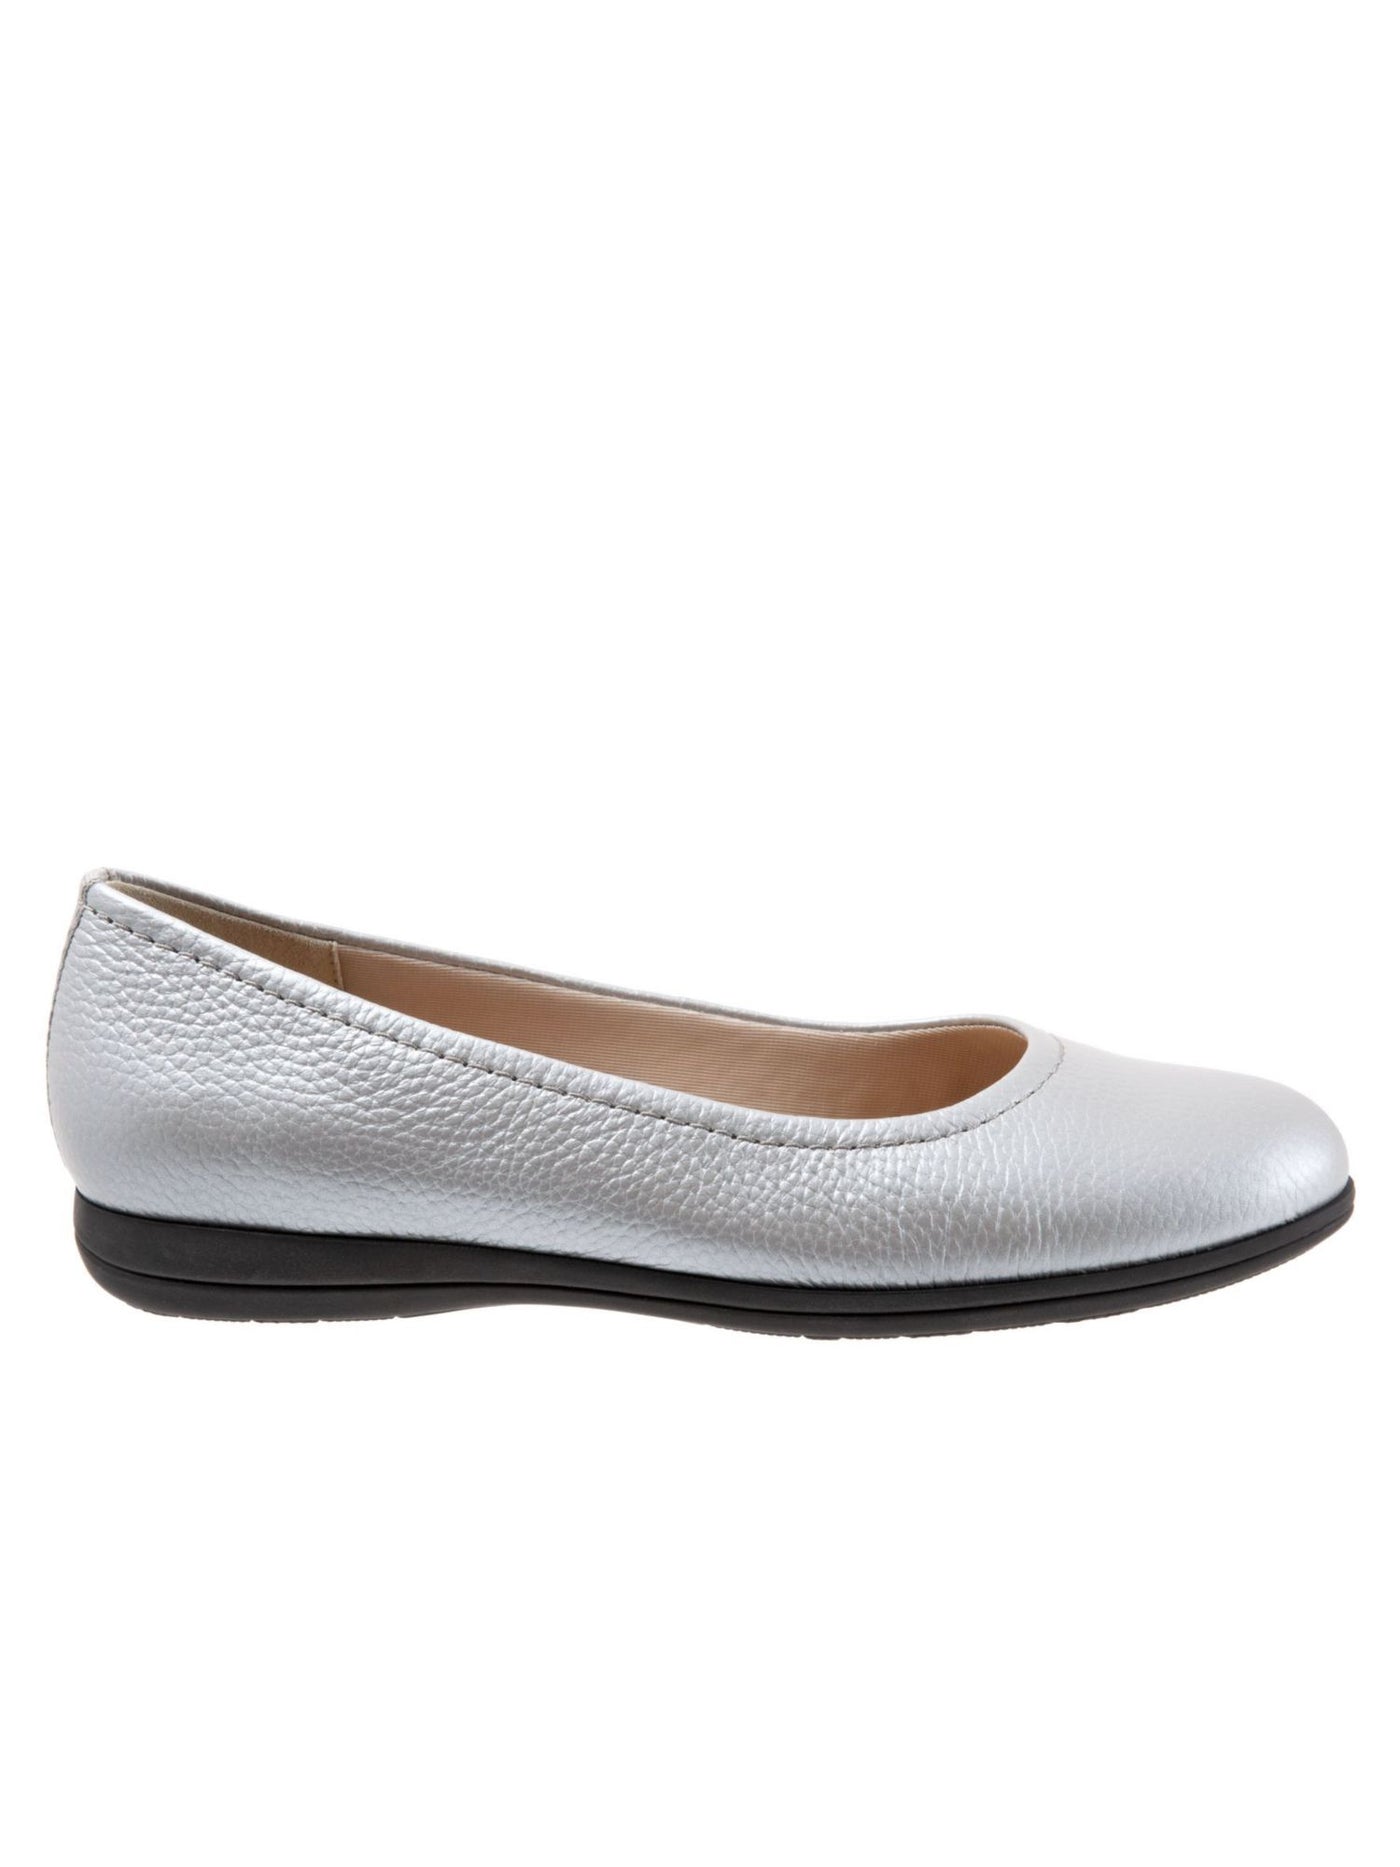 TROTTERS Womens Silver Cushioned Removable Insole Darcey Round Toe Slip On Leather Flats Shoes 6 W